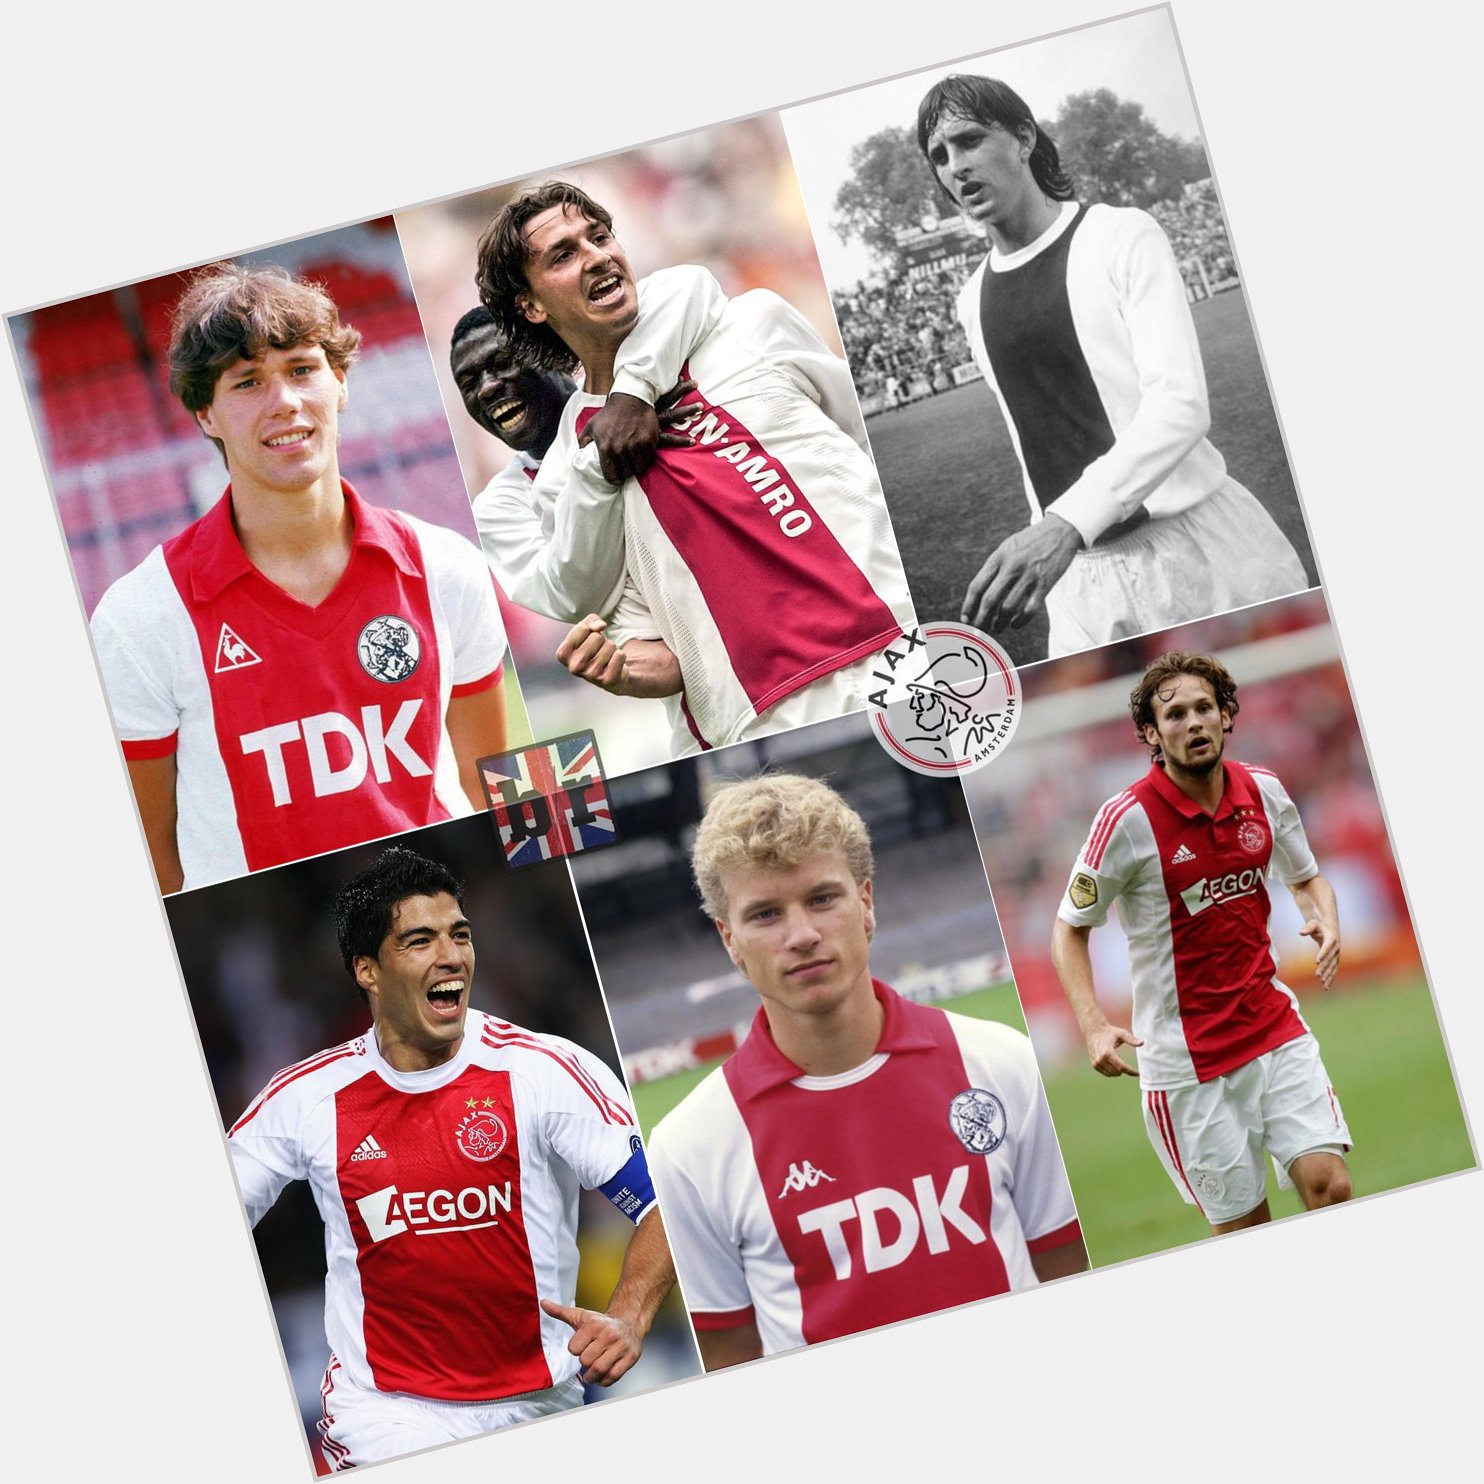   Happy Birthday to one of the world\s great football clubs. 
 Why is Daley Blind anywhere near this picture ?